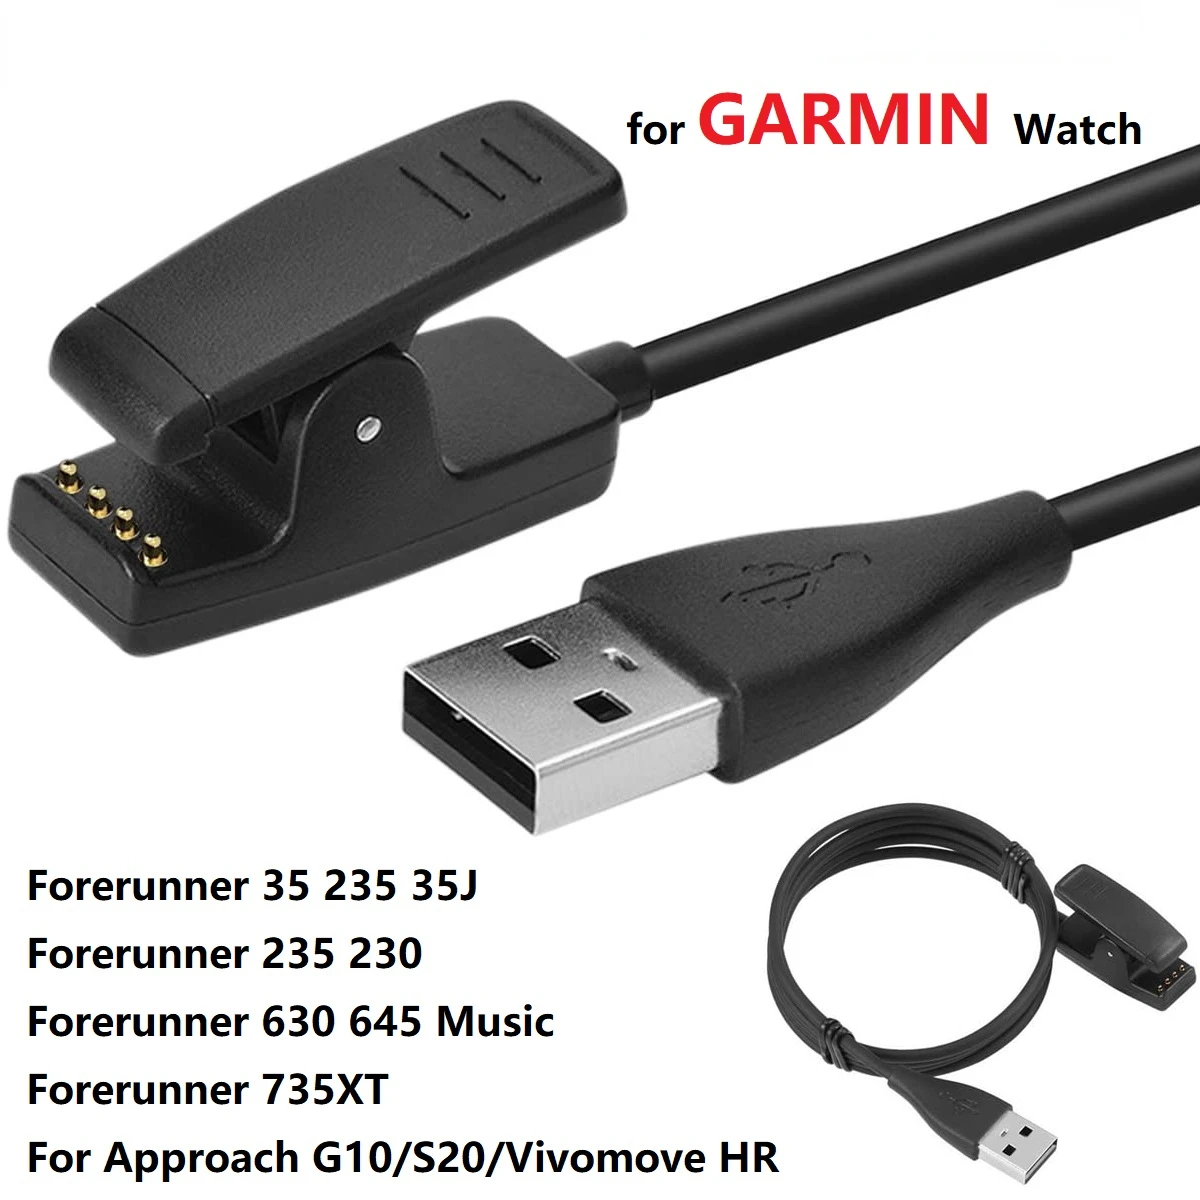 

Charger Cable for Garmin Lily Forerunner 35 35J 235 735XT 230 645 Vivomove HR Approach G10 S20 Smart Watch USB Charging Clip